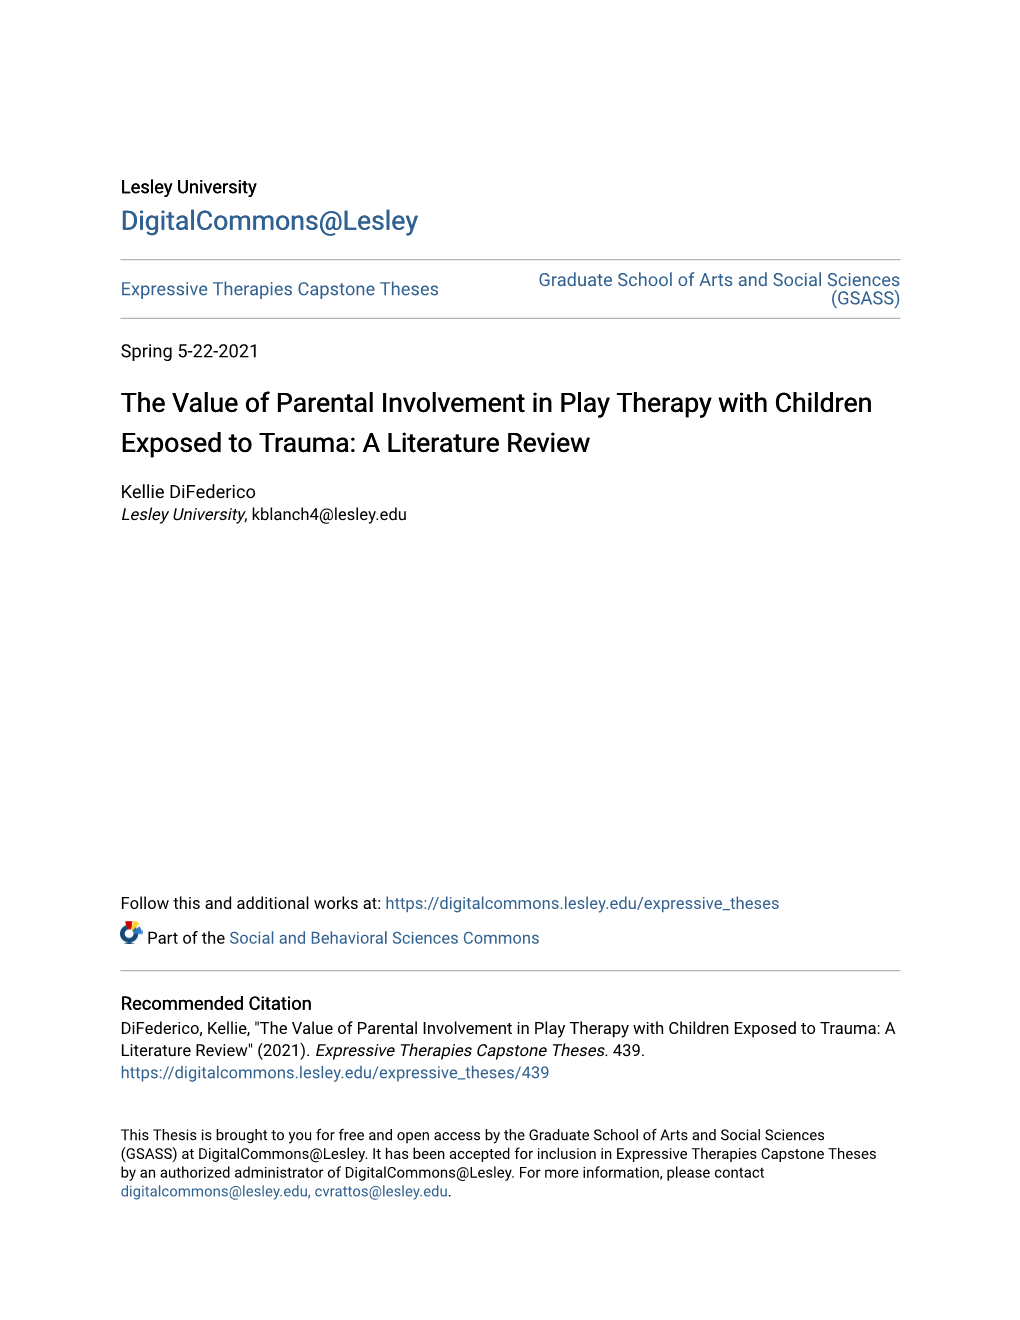 The Value of Parental Involvement in Play Therapy with Children Exposed to Trauma: a Literature Review